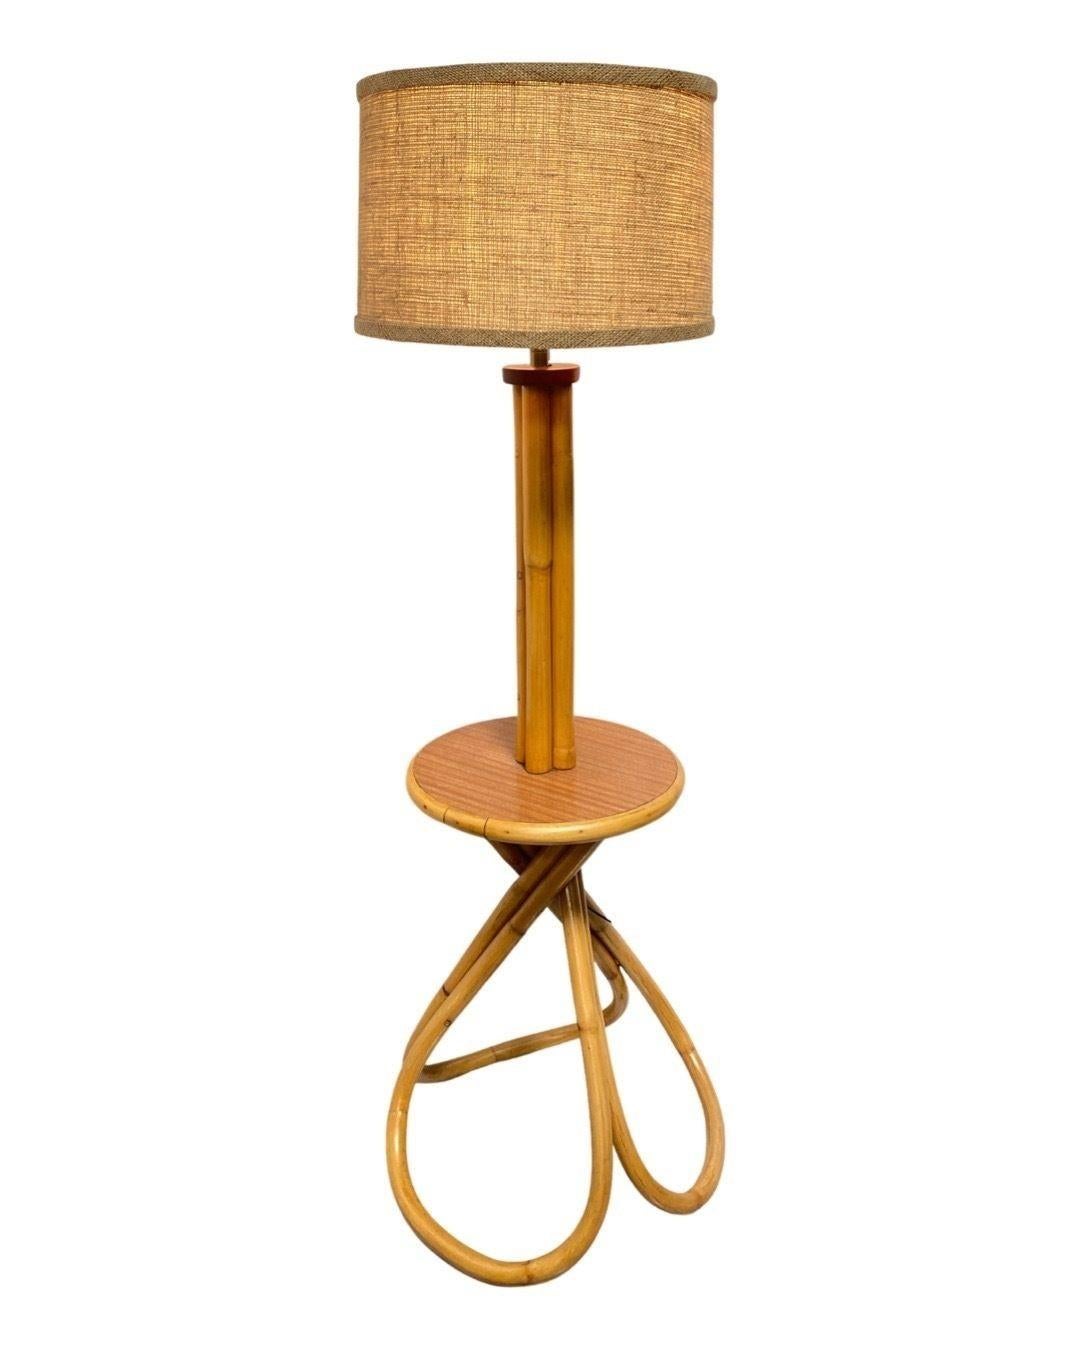 Restored Mid Century Bent Rattan Floor Lamp with Side Table Base and Hemp Shade 1